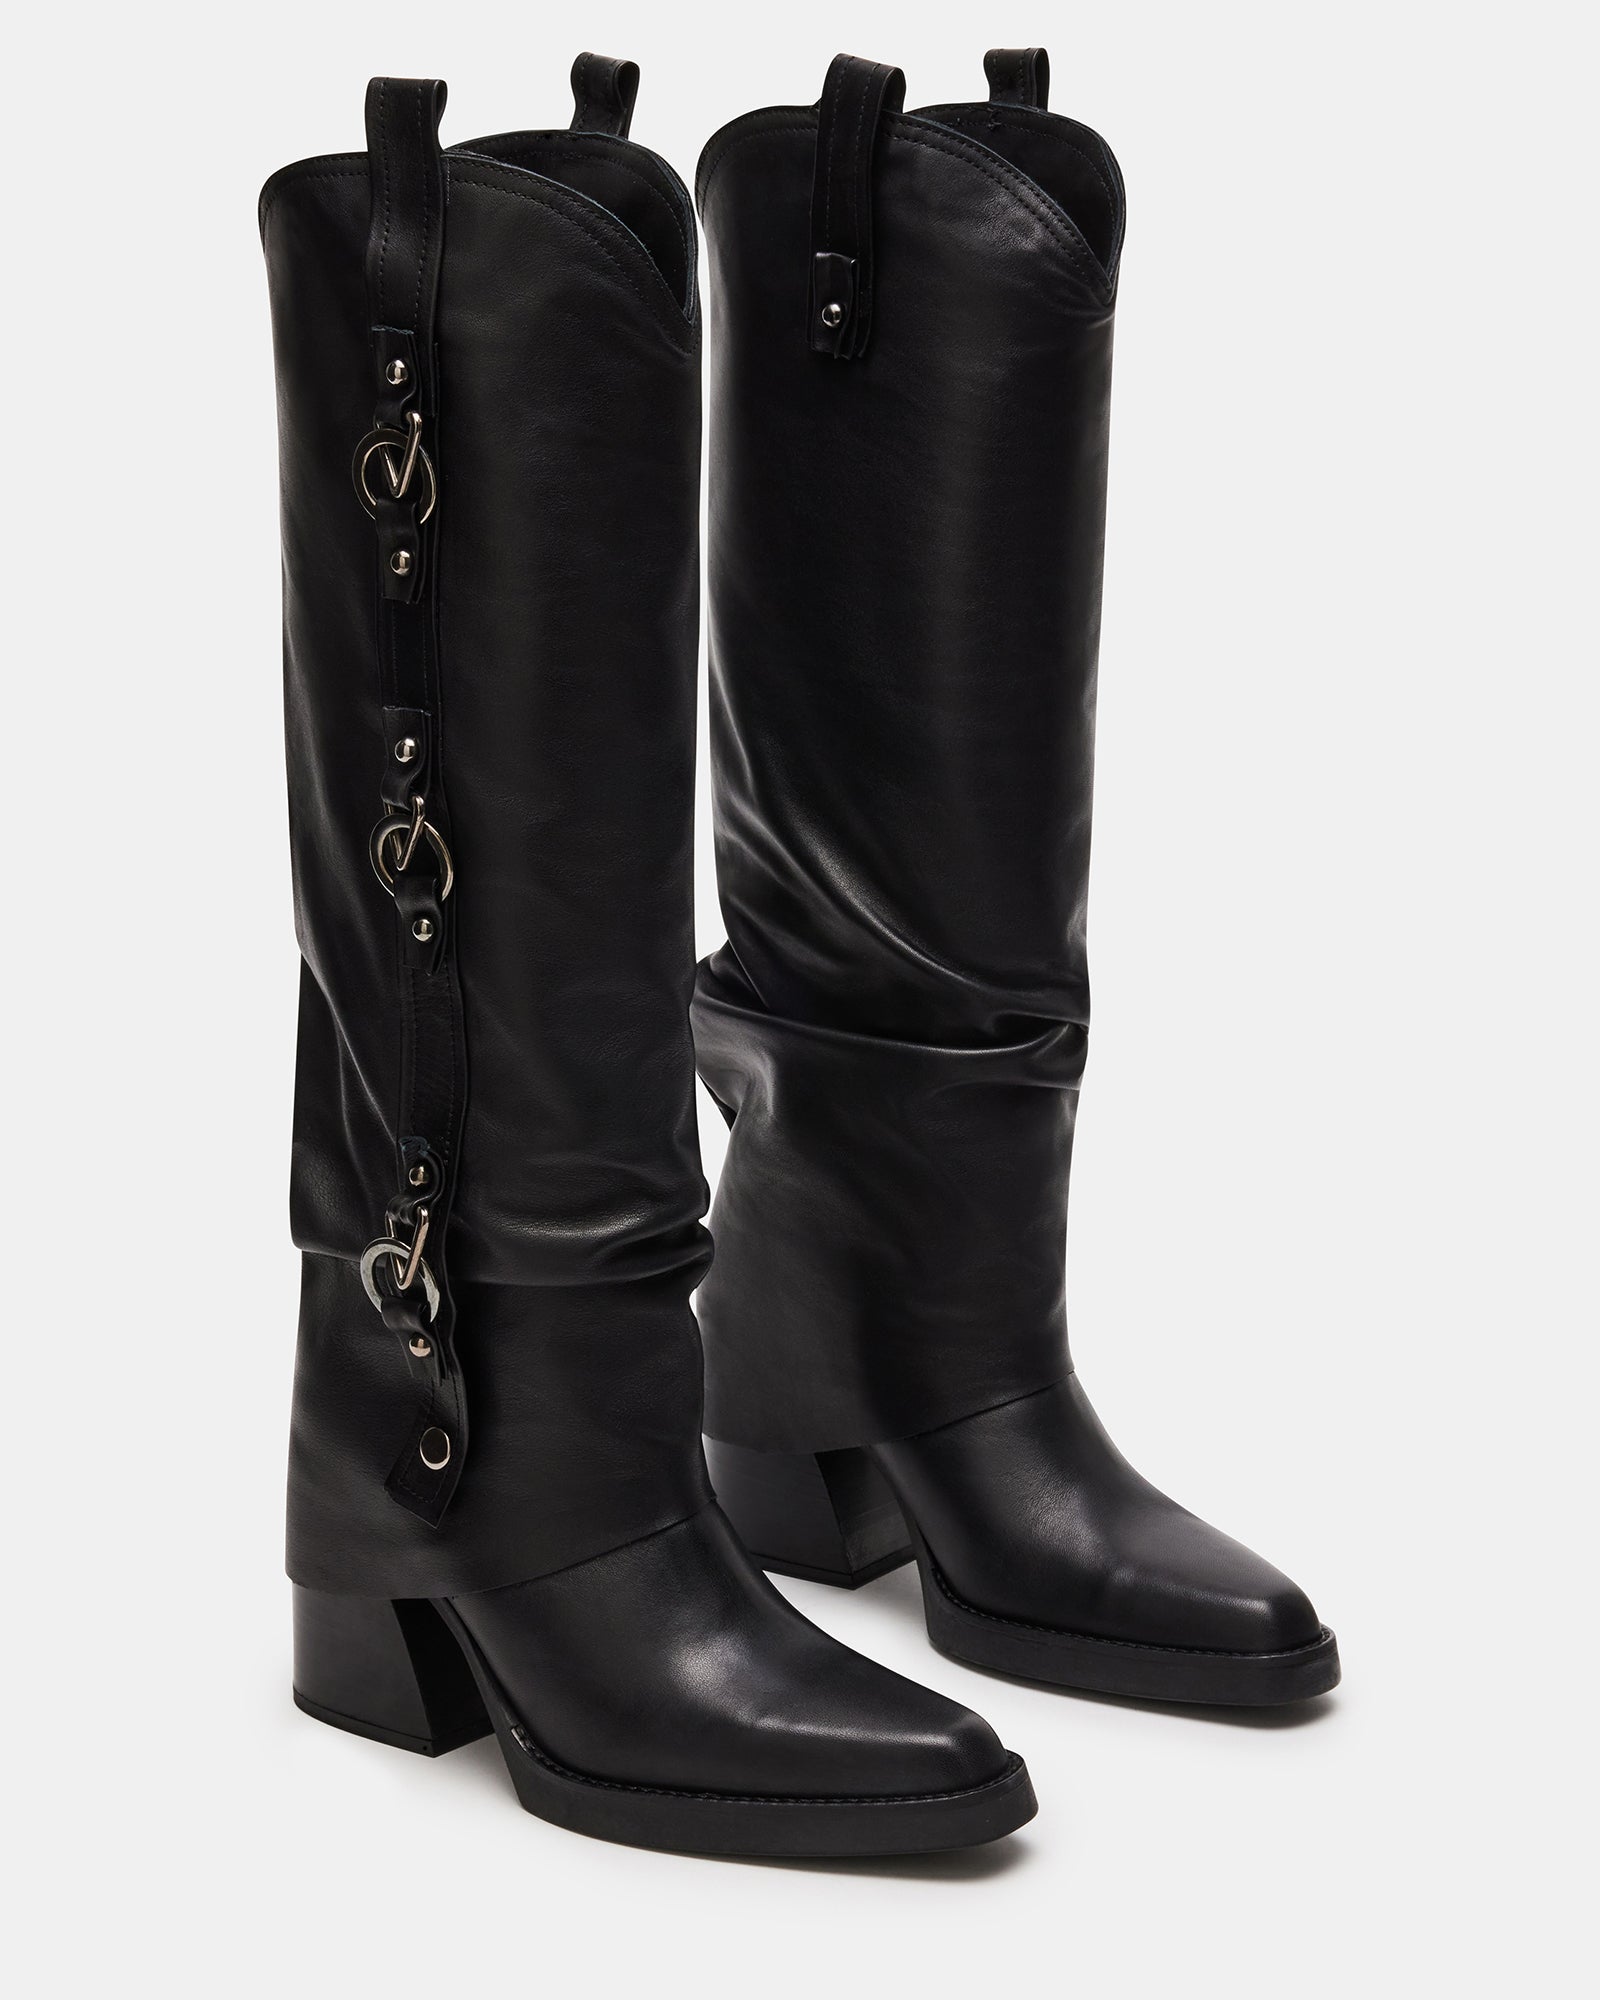 JETT Black Leather Fold Over Western Boot | Women's Cowboy Boots ...